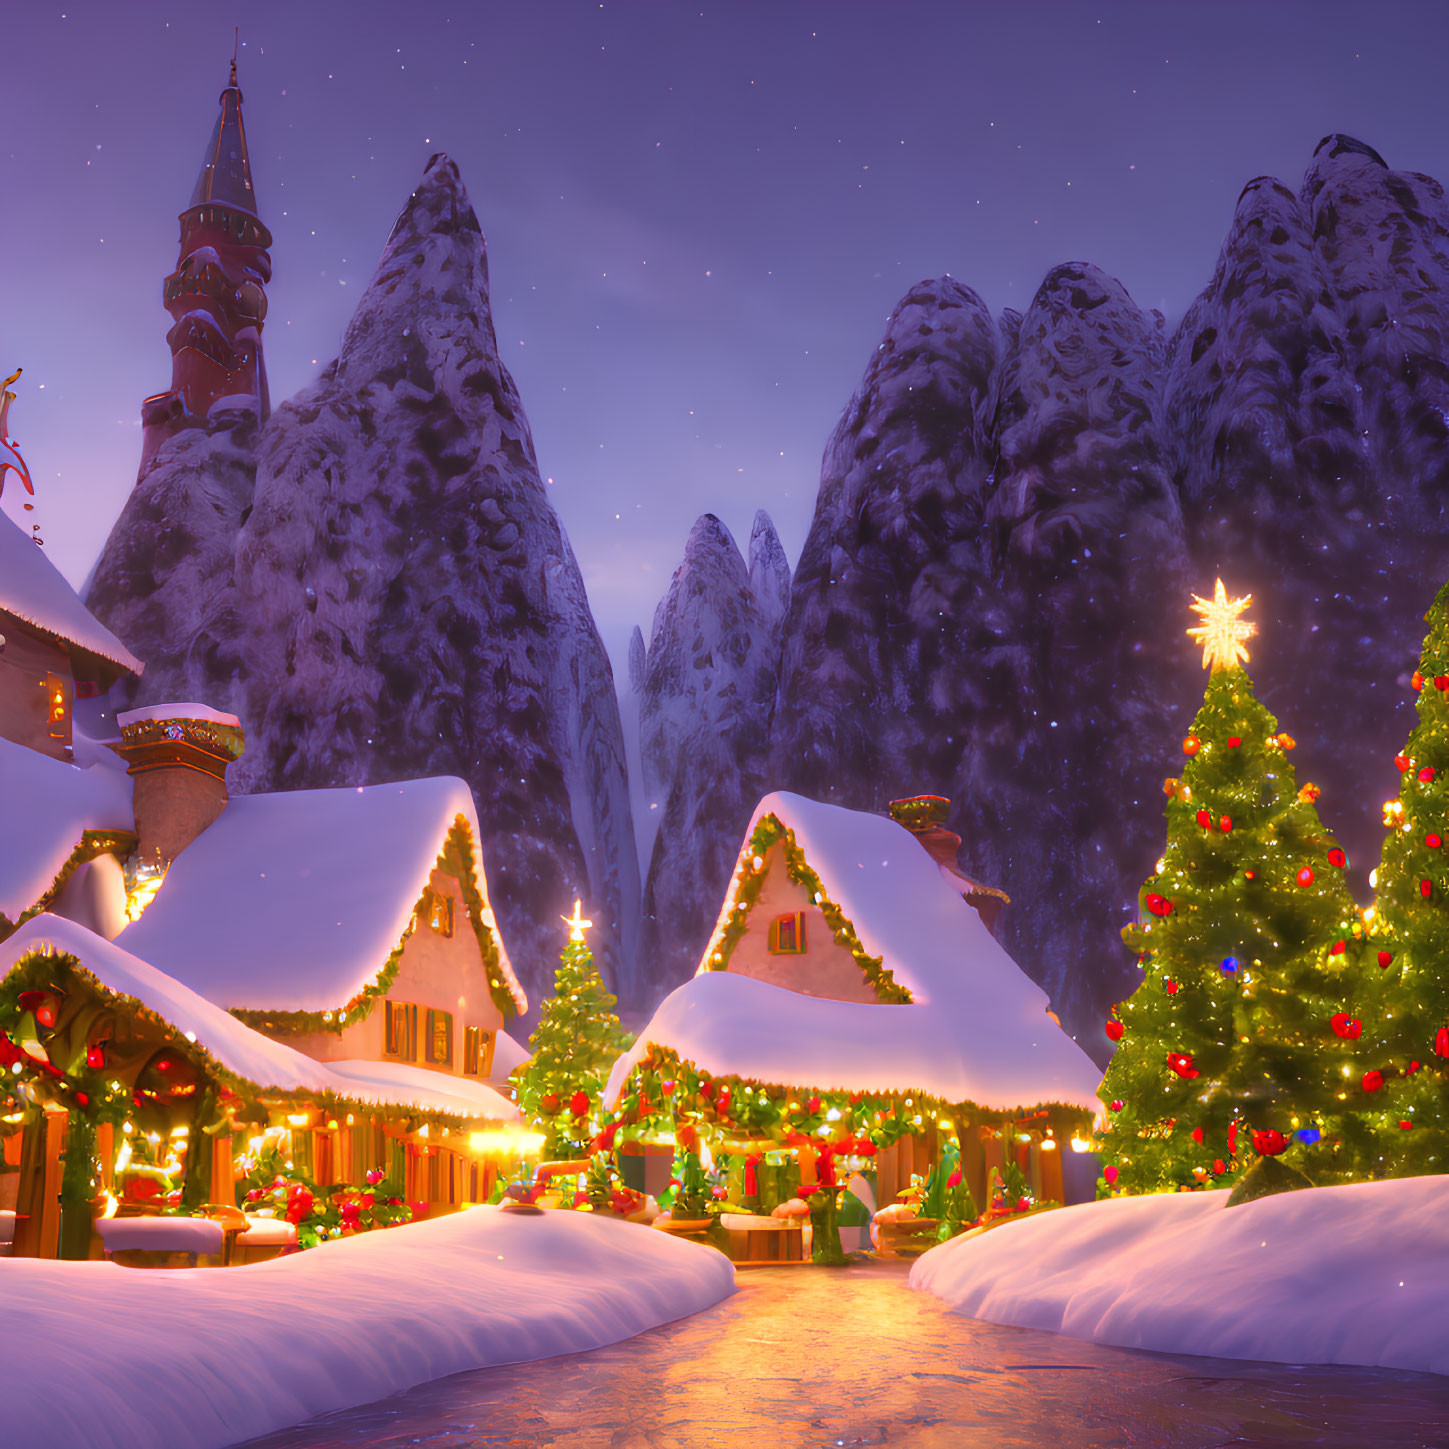 Snow-covered village with Christmas lights, cozy cottages, and star-topped tree at dusk